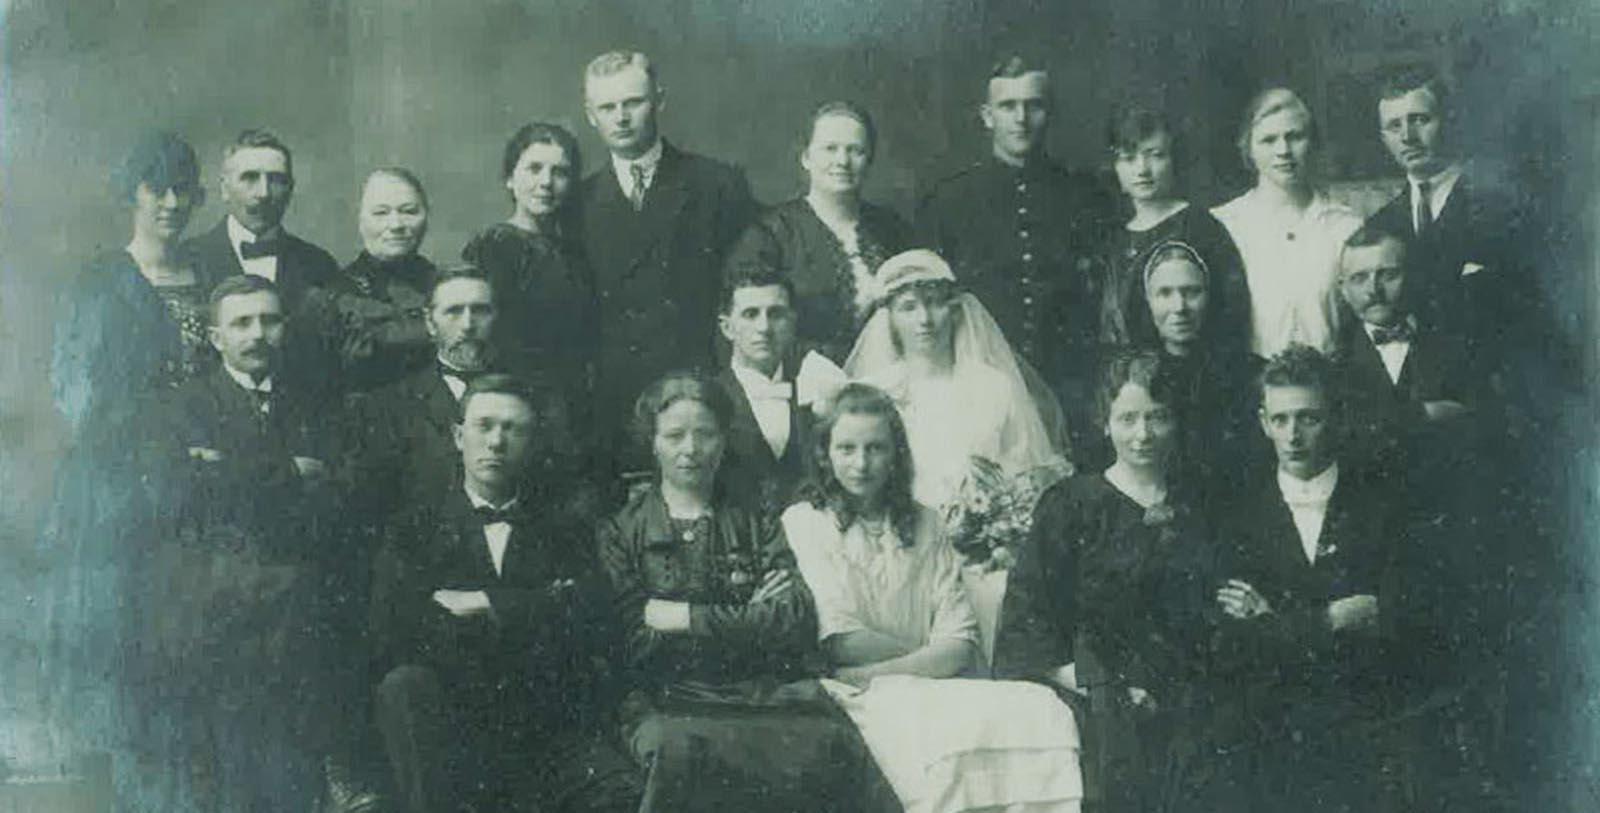 Historic Image of the Haaheim family at a Wedding